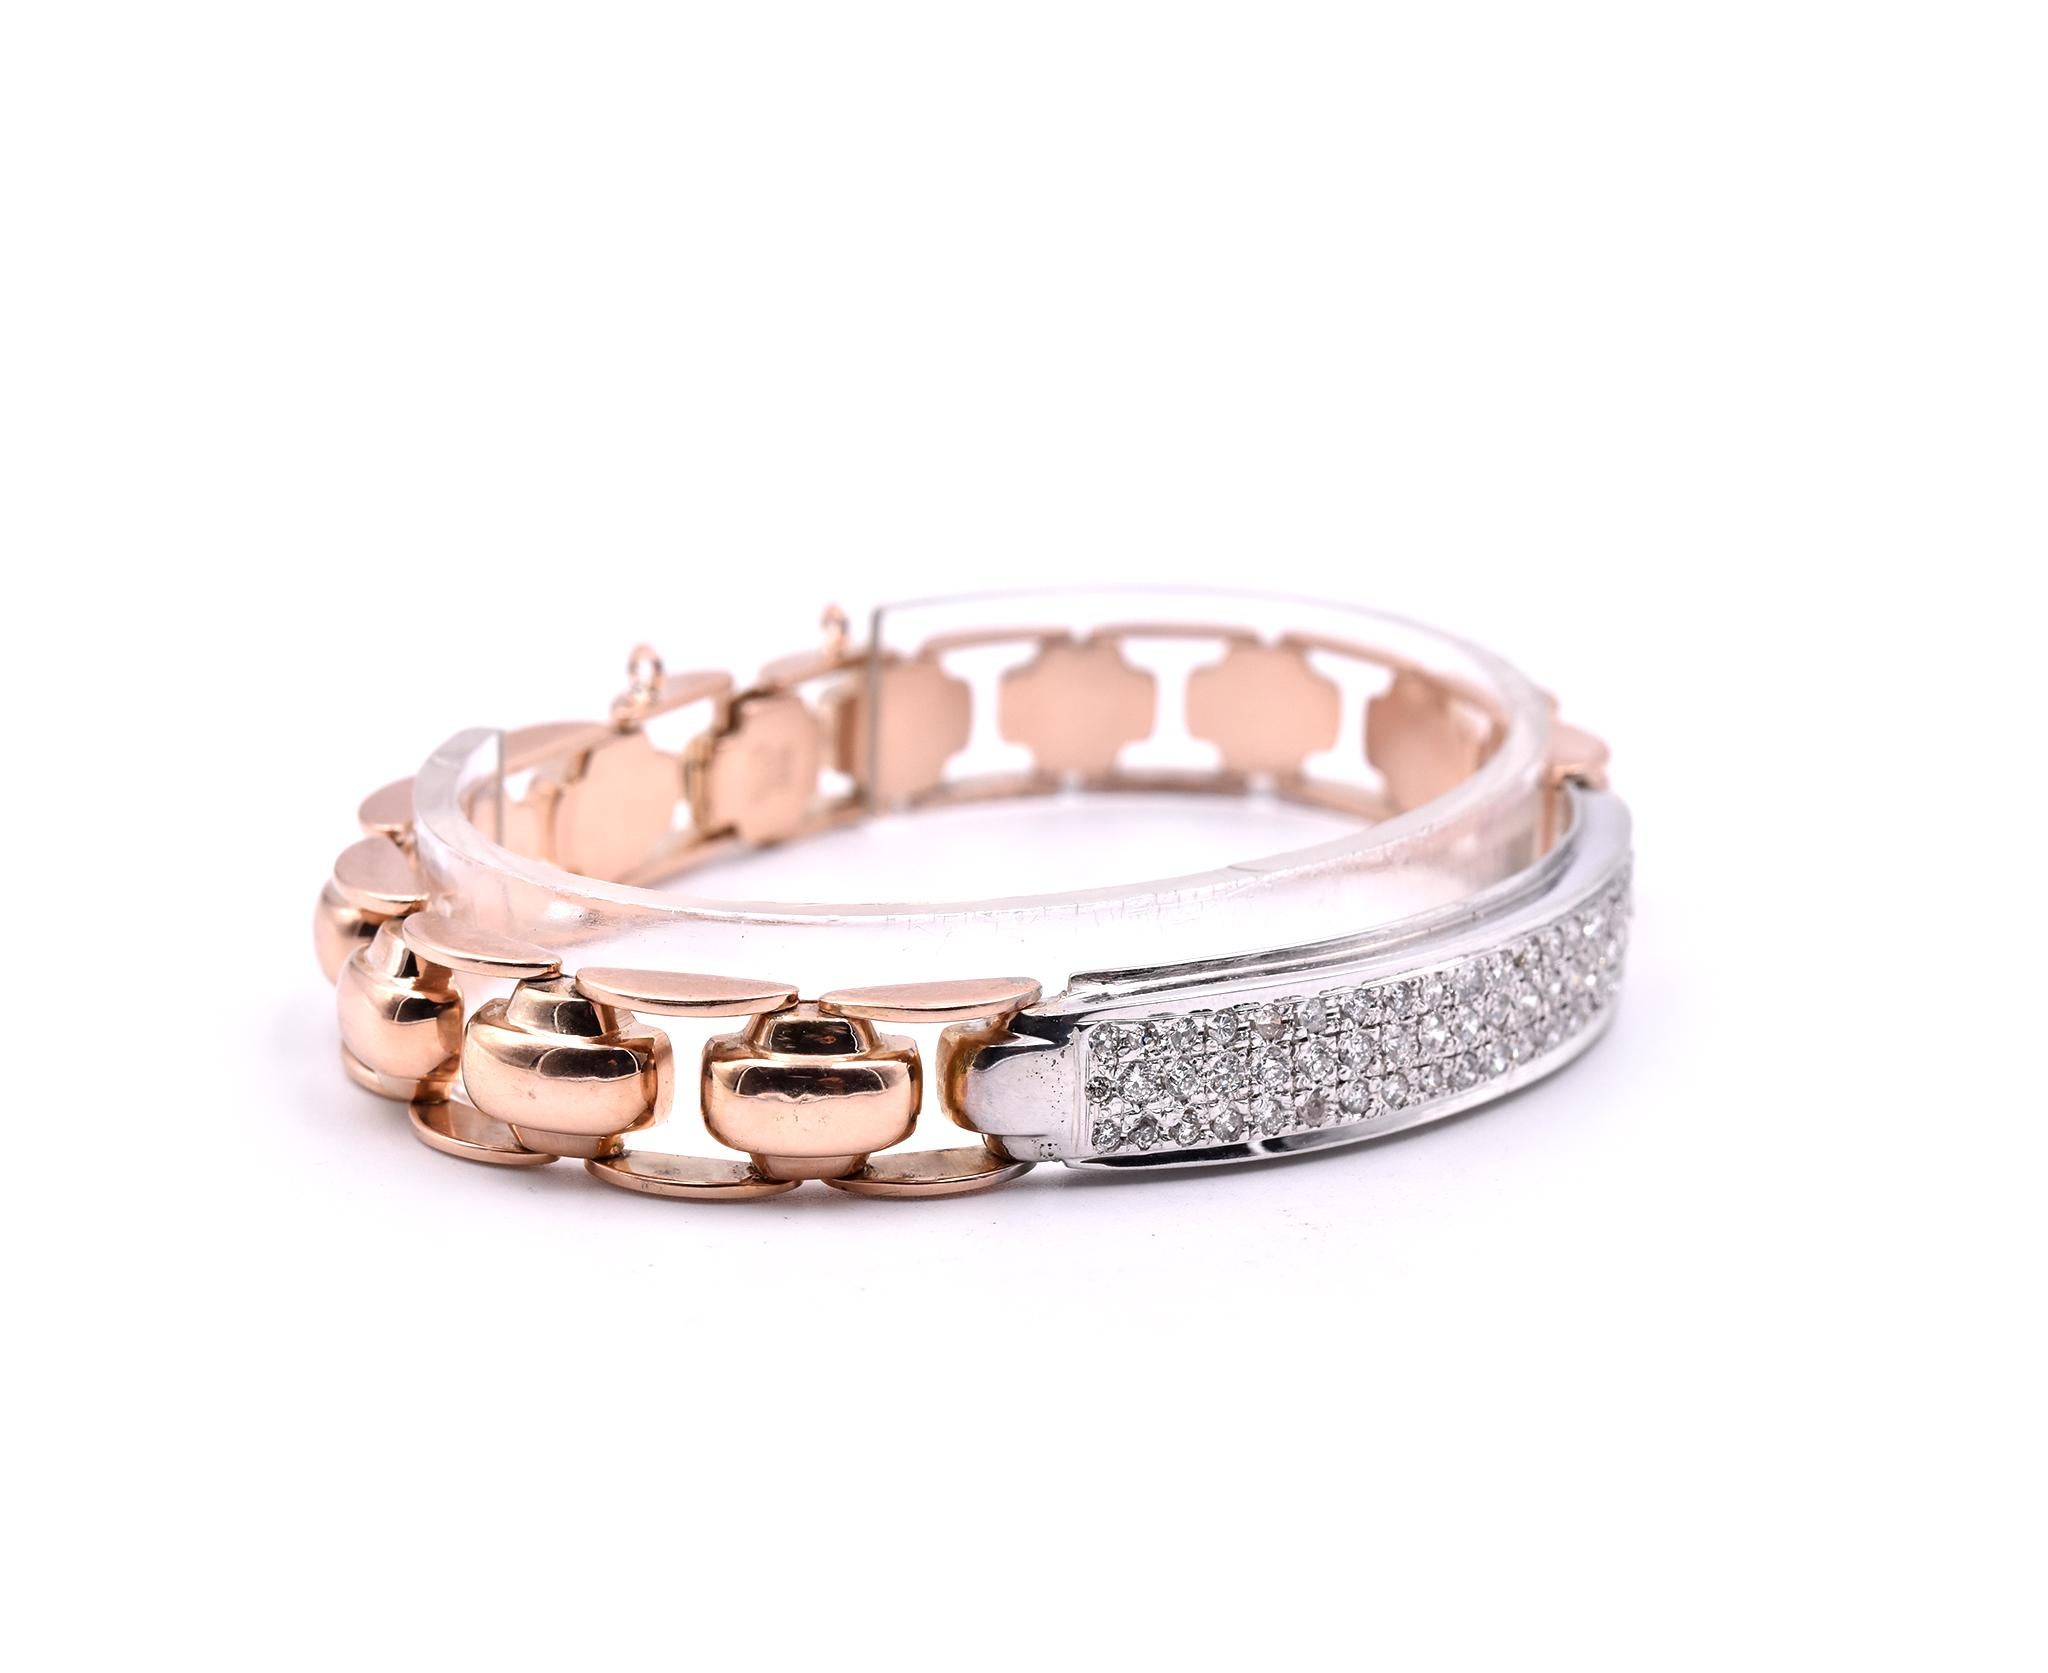 Designer: custom
Material: 14k rose gold
Diamonds: 66 round brilliant cut = 2.75cttw
Color: G
Clarity: VS
Dimensions: bracelet is 8-inch long and it is 10.58mm wide
Weight: 38.78 grams
